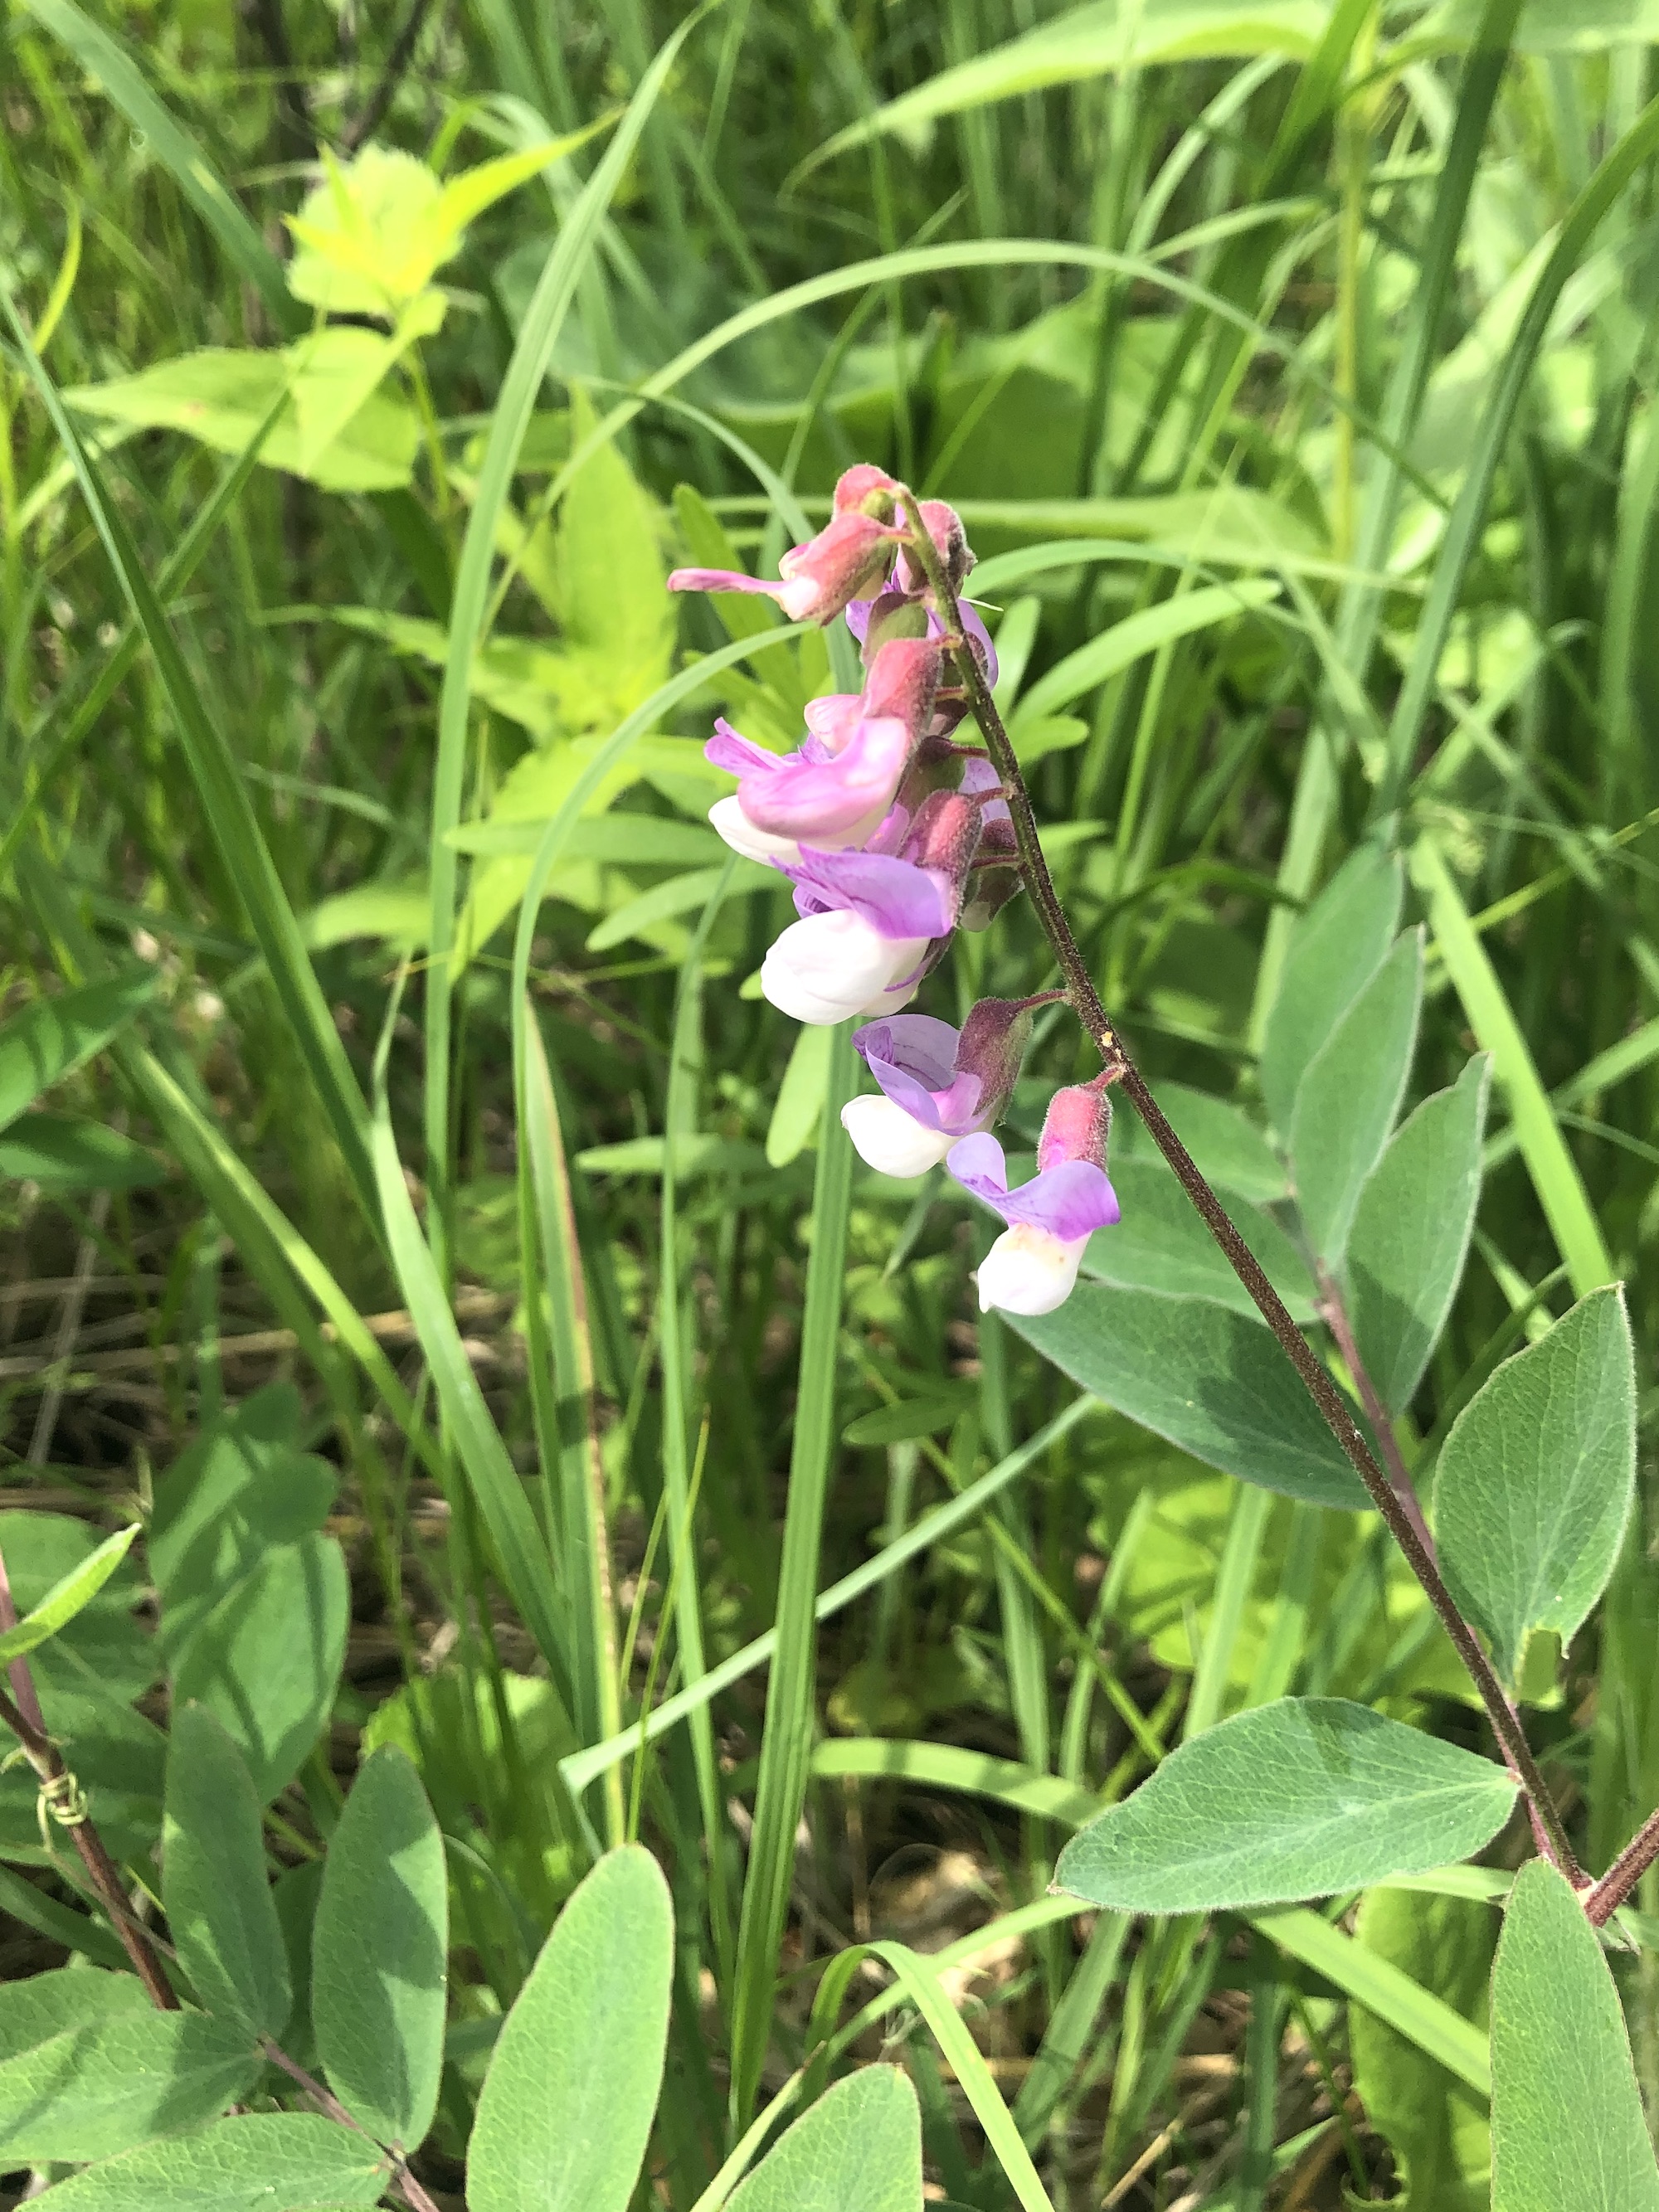 Veiny Pea in the Curtis Prairie in the University of Wisconsin-Madison Arboretum in Madison, Wisconsin on June 7, 2022.